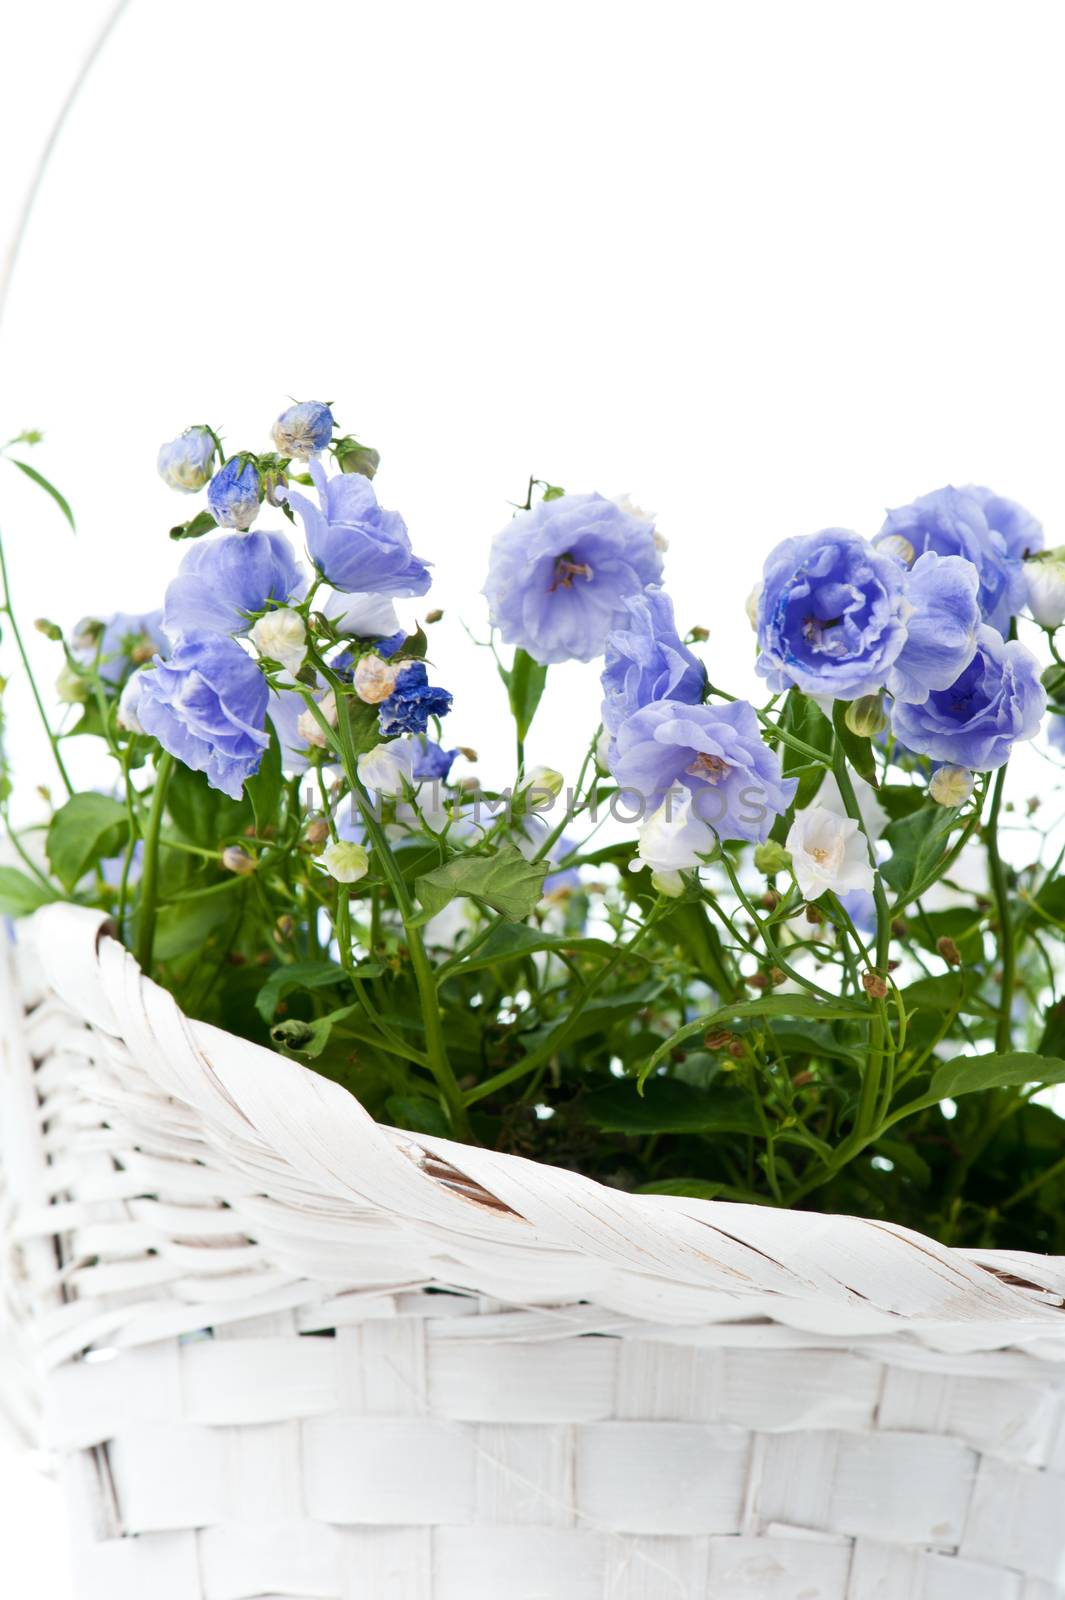 Bouquet of blue spring flowers in white basket isolated on white